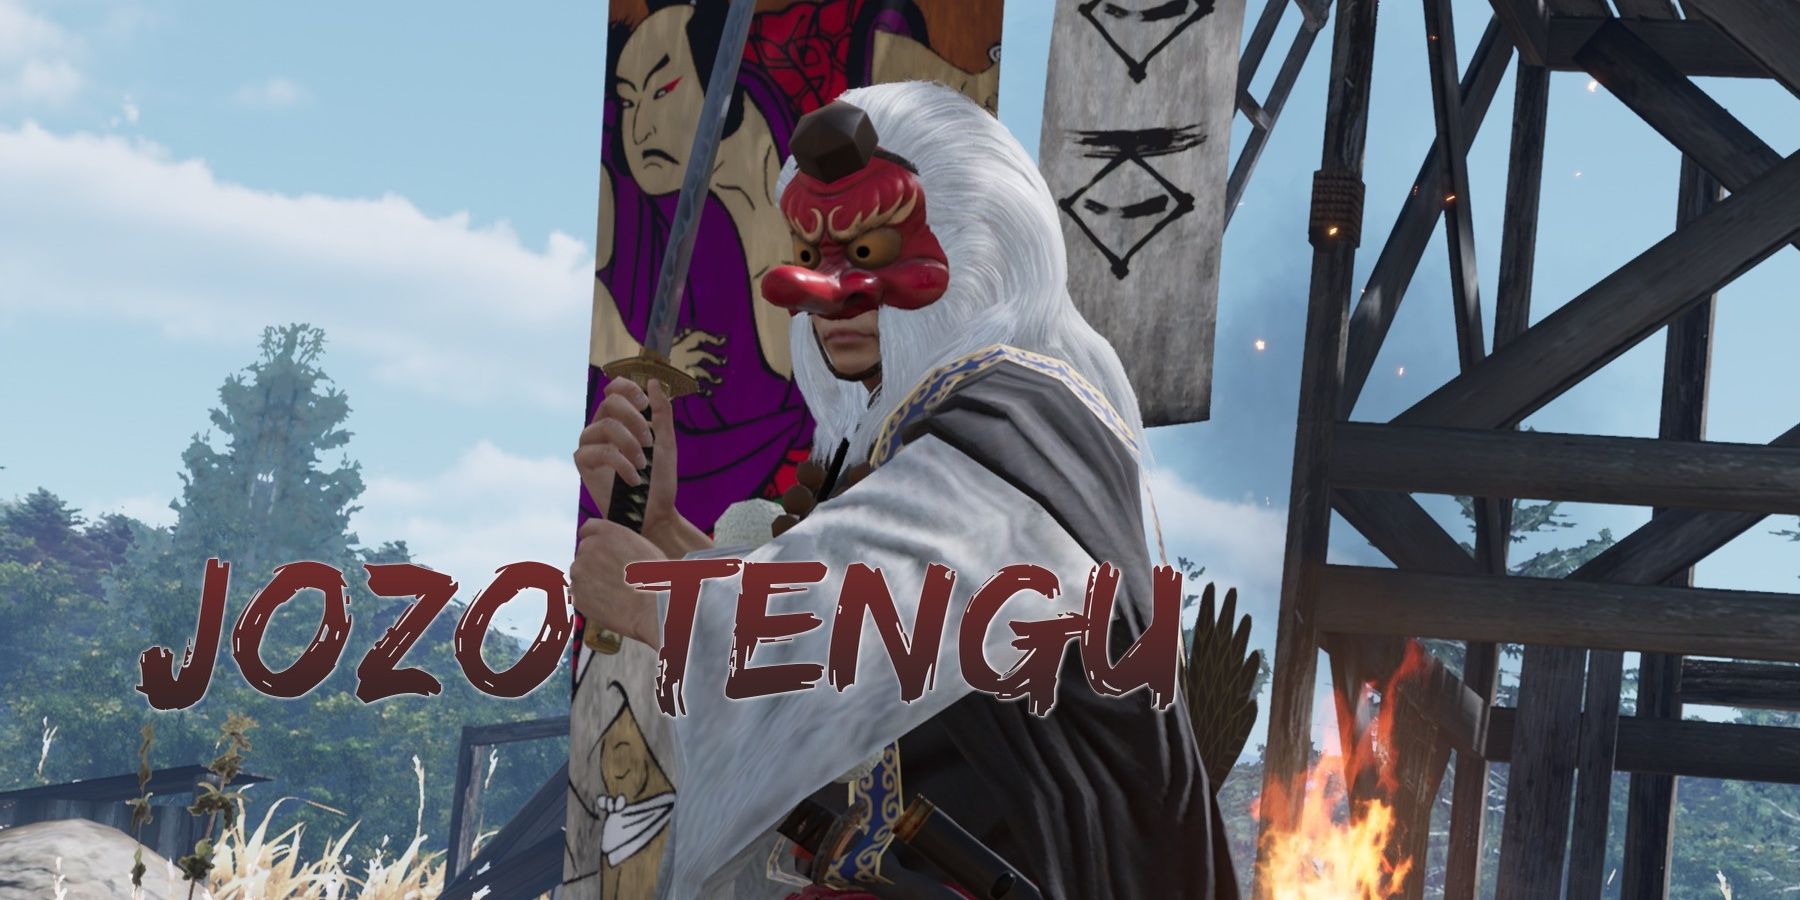 Jozo Tengu being introduced in the Arena as the fight with Ryoma is about to begin.